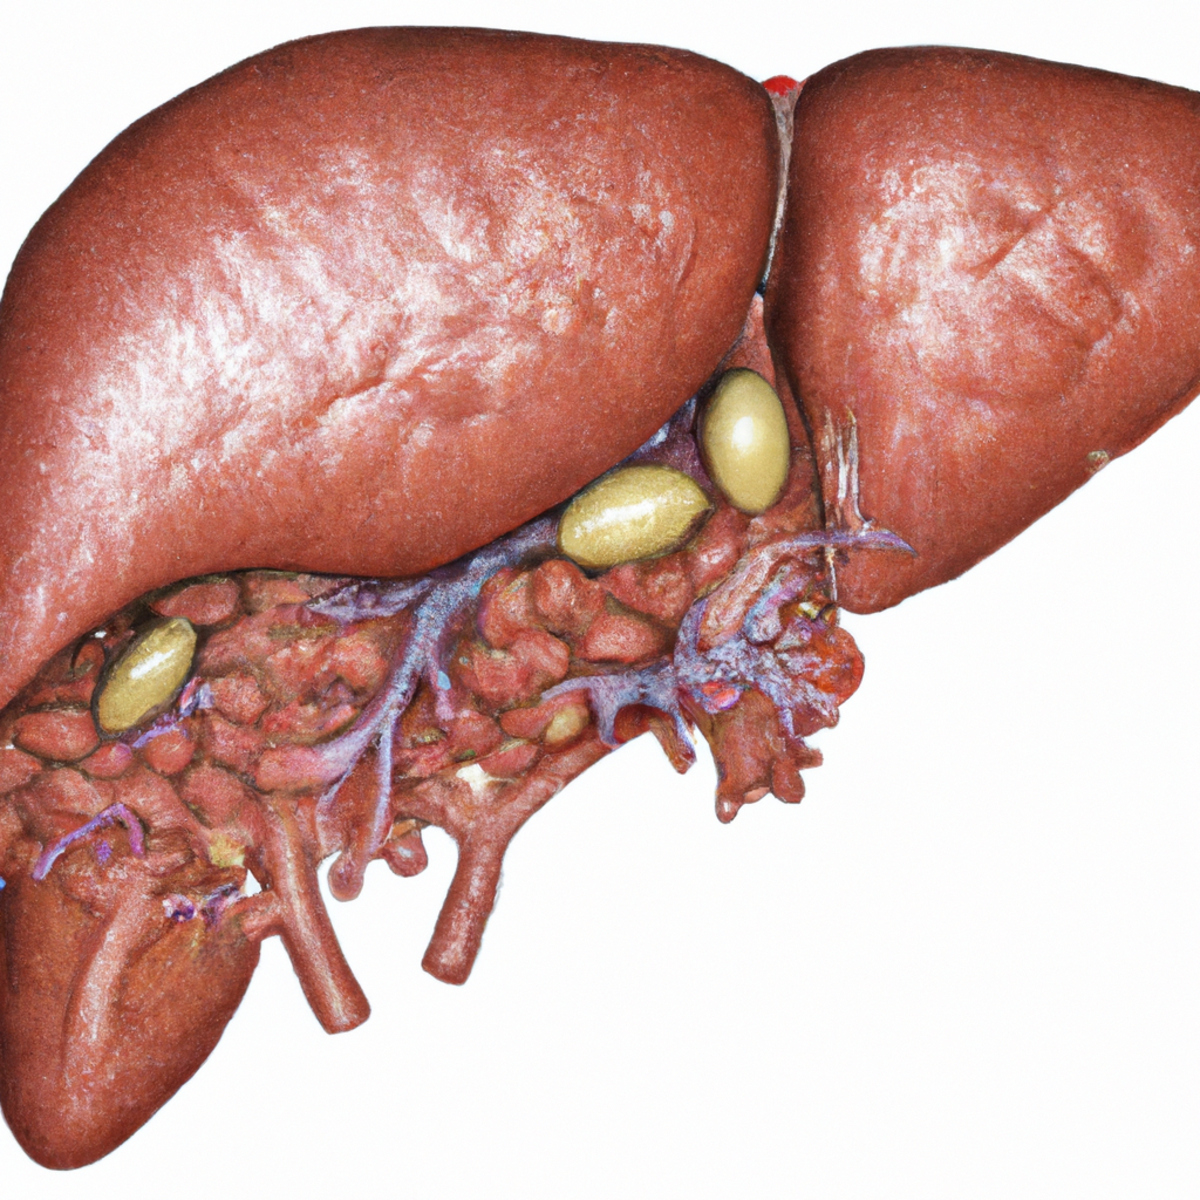 Close-up photo of lifelike liver model, showcasing intricate structure, blood vessels, and bile ducts with remarkable accuracy - Progressive Familial Intrahepatic Cholestasis (PFIC)